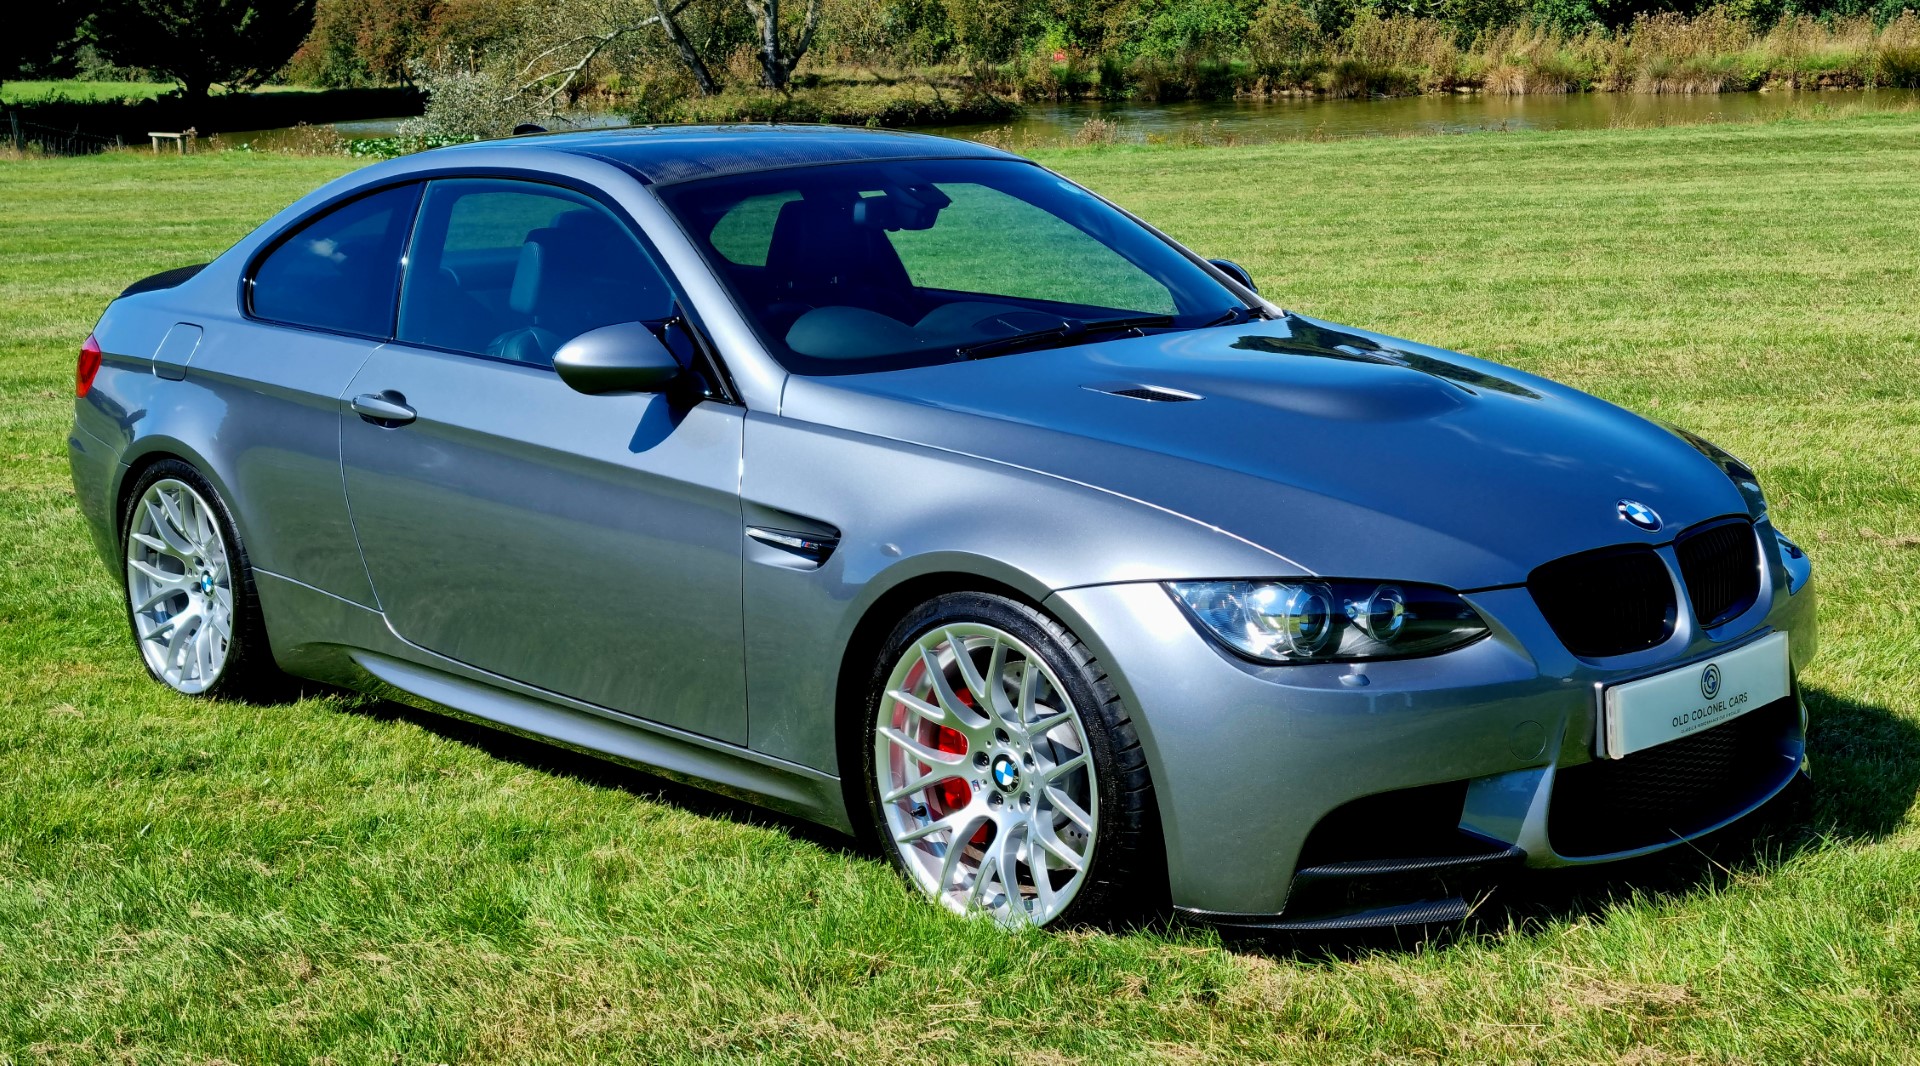 BMW E92 M3 V8 MANUAL - Old Colonel Cars - Old Colonel Cars